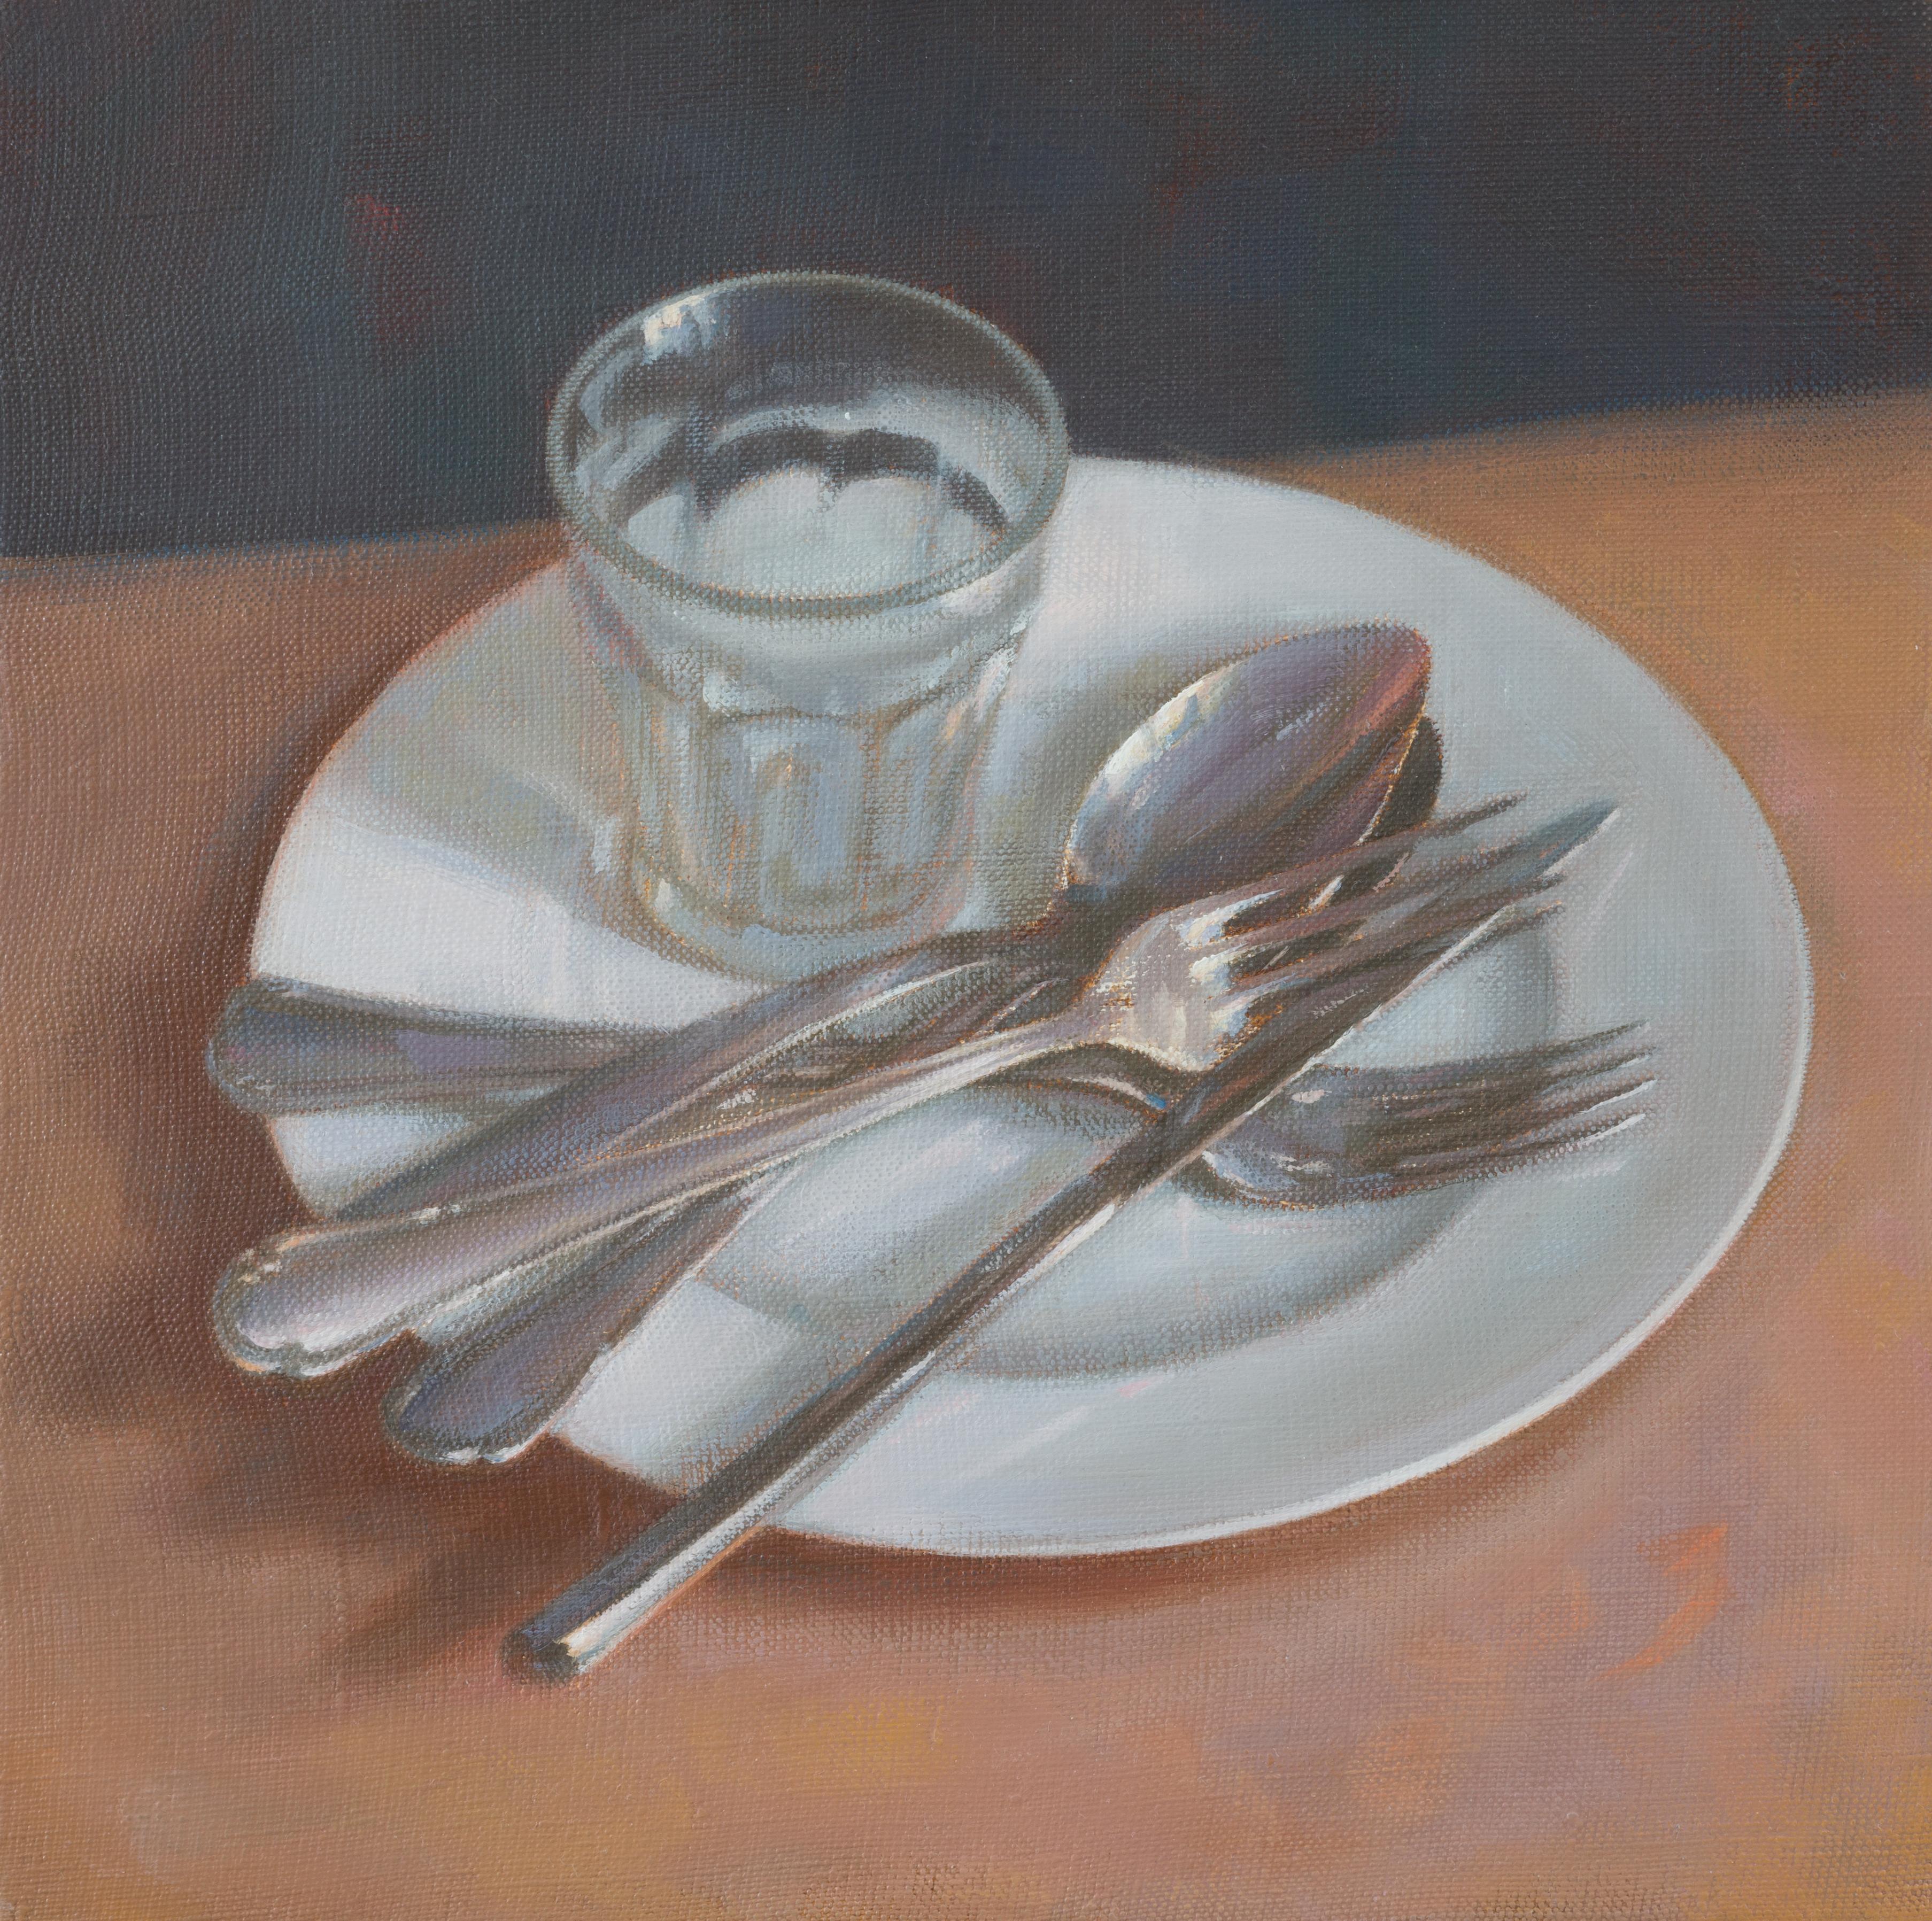 The picture is painted on a quality 100% linen canvas with an oil color of high quality. The painting technique is many-layer.
"I love the way the silver and glass objects are reflected on the white plate and the subtly warm and cool color